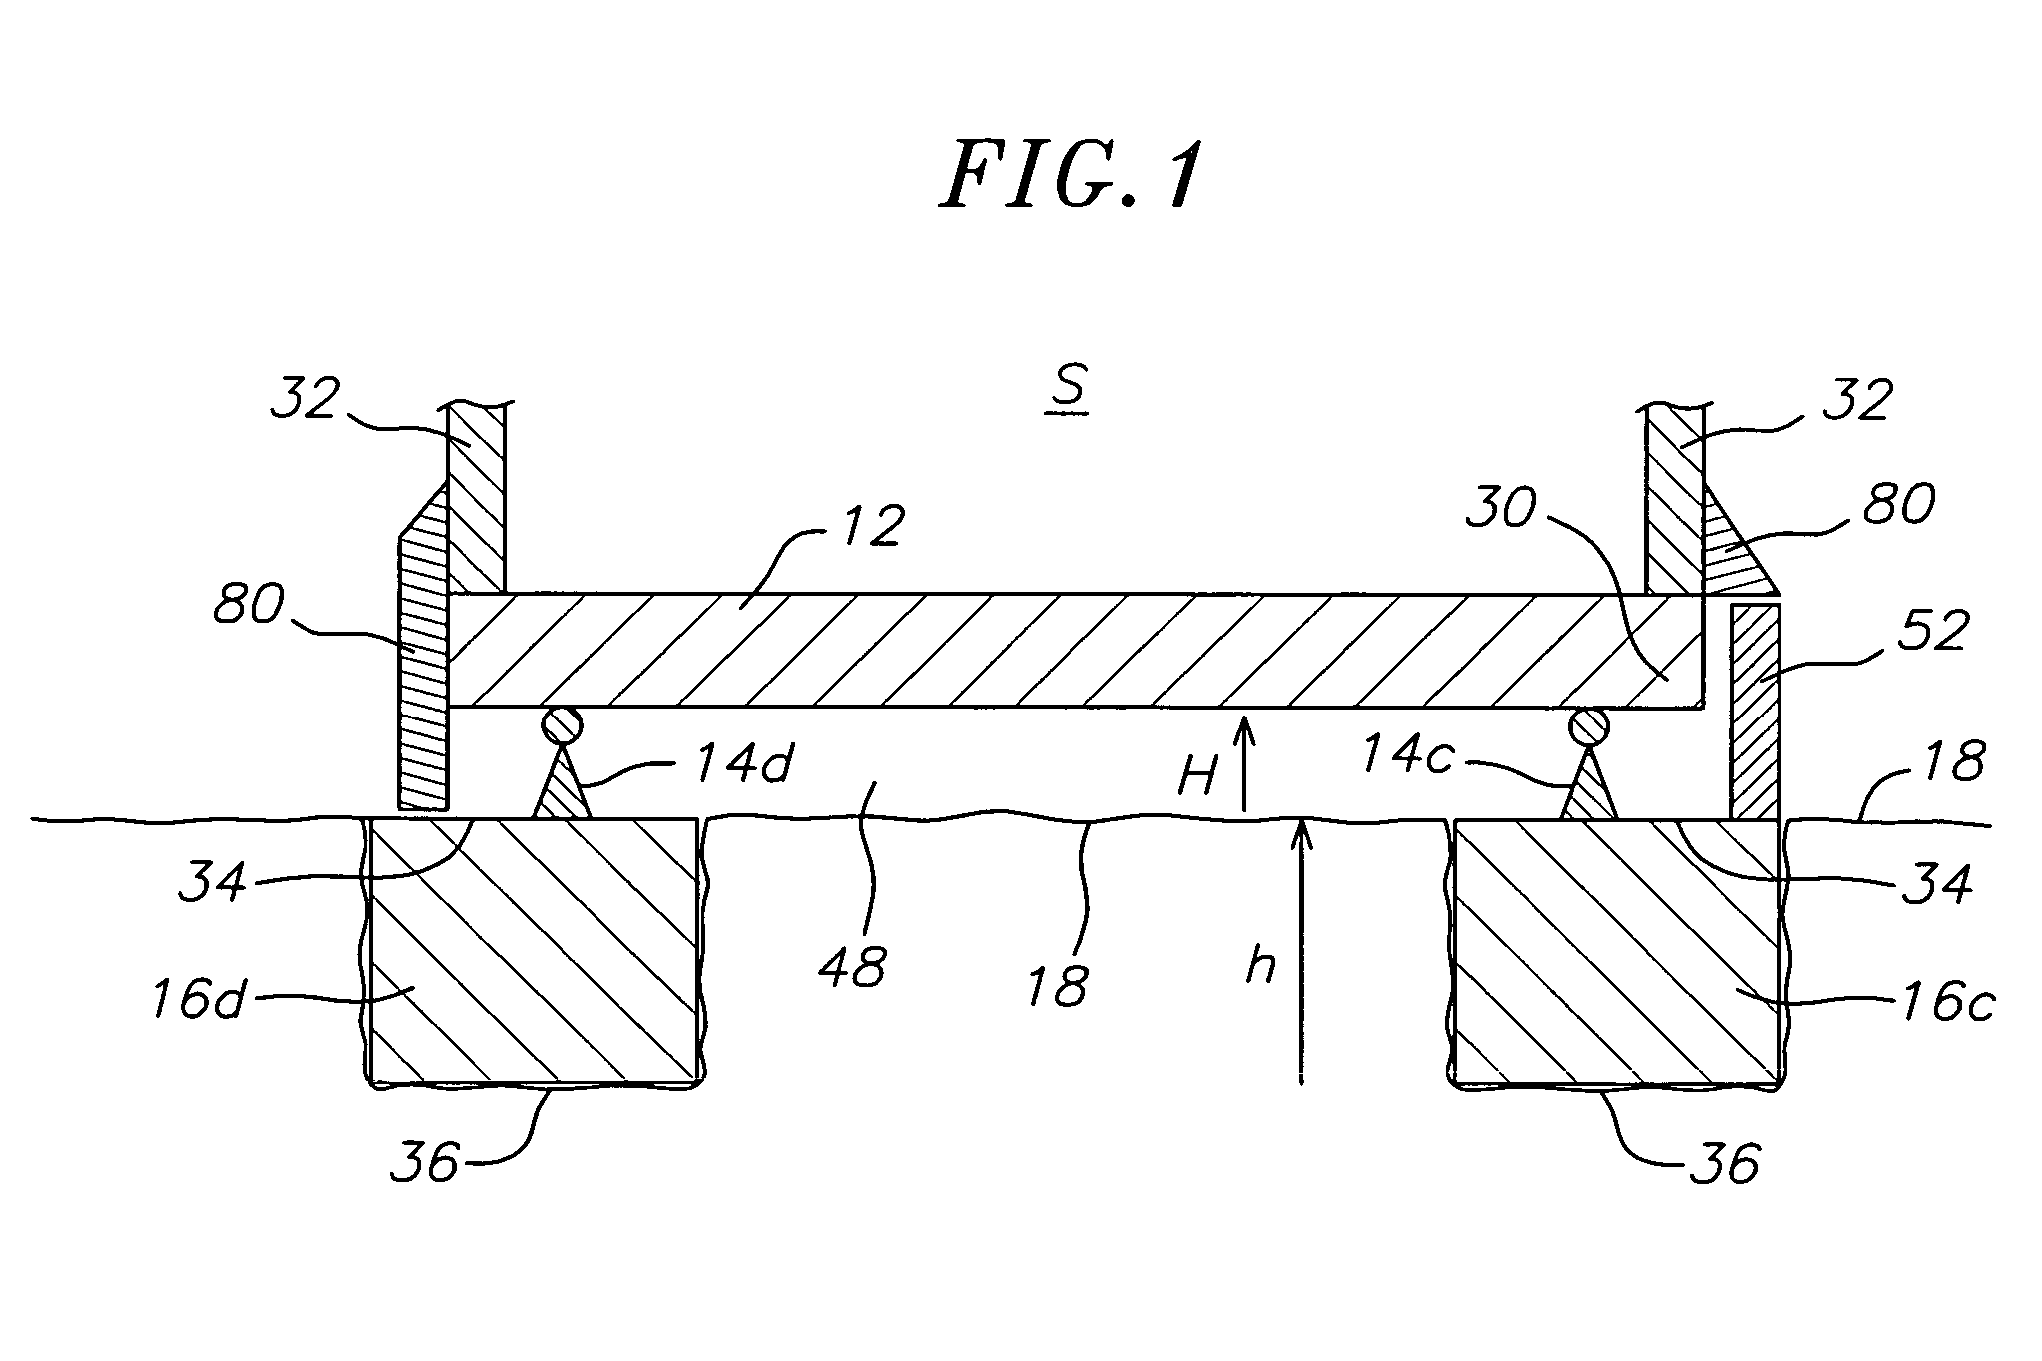 Method of constructing structures with seismically-isolated base